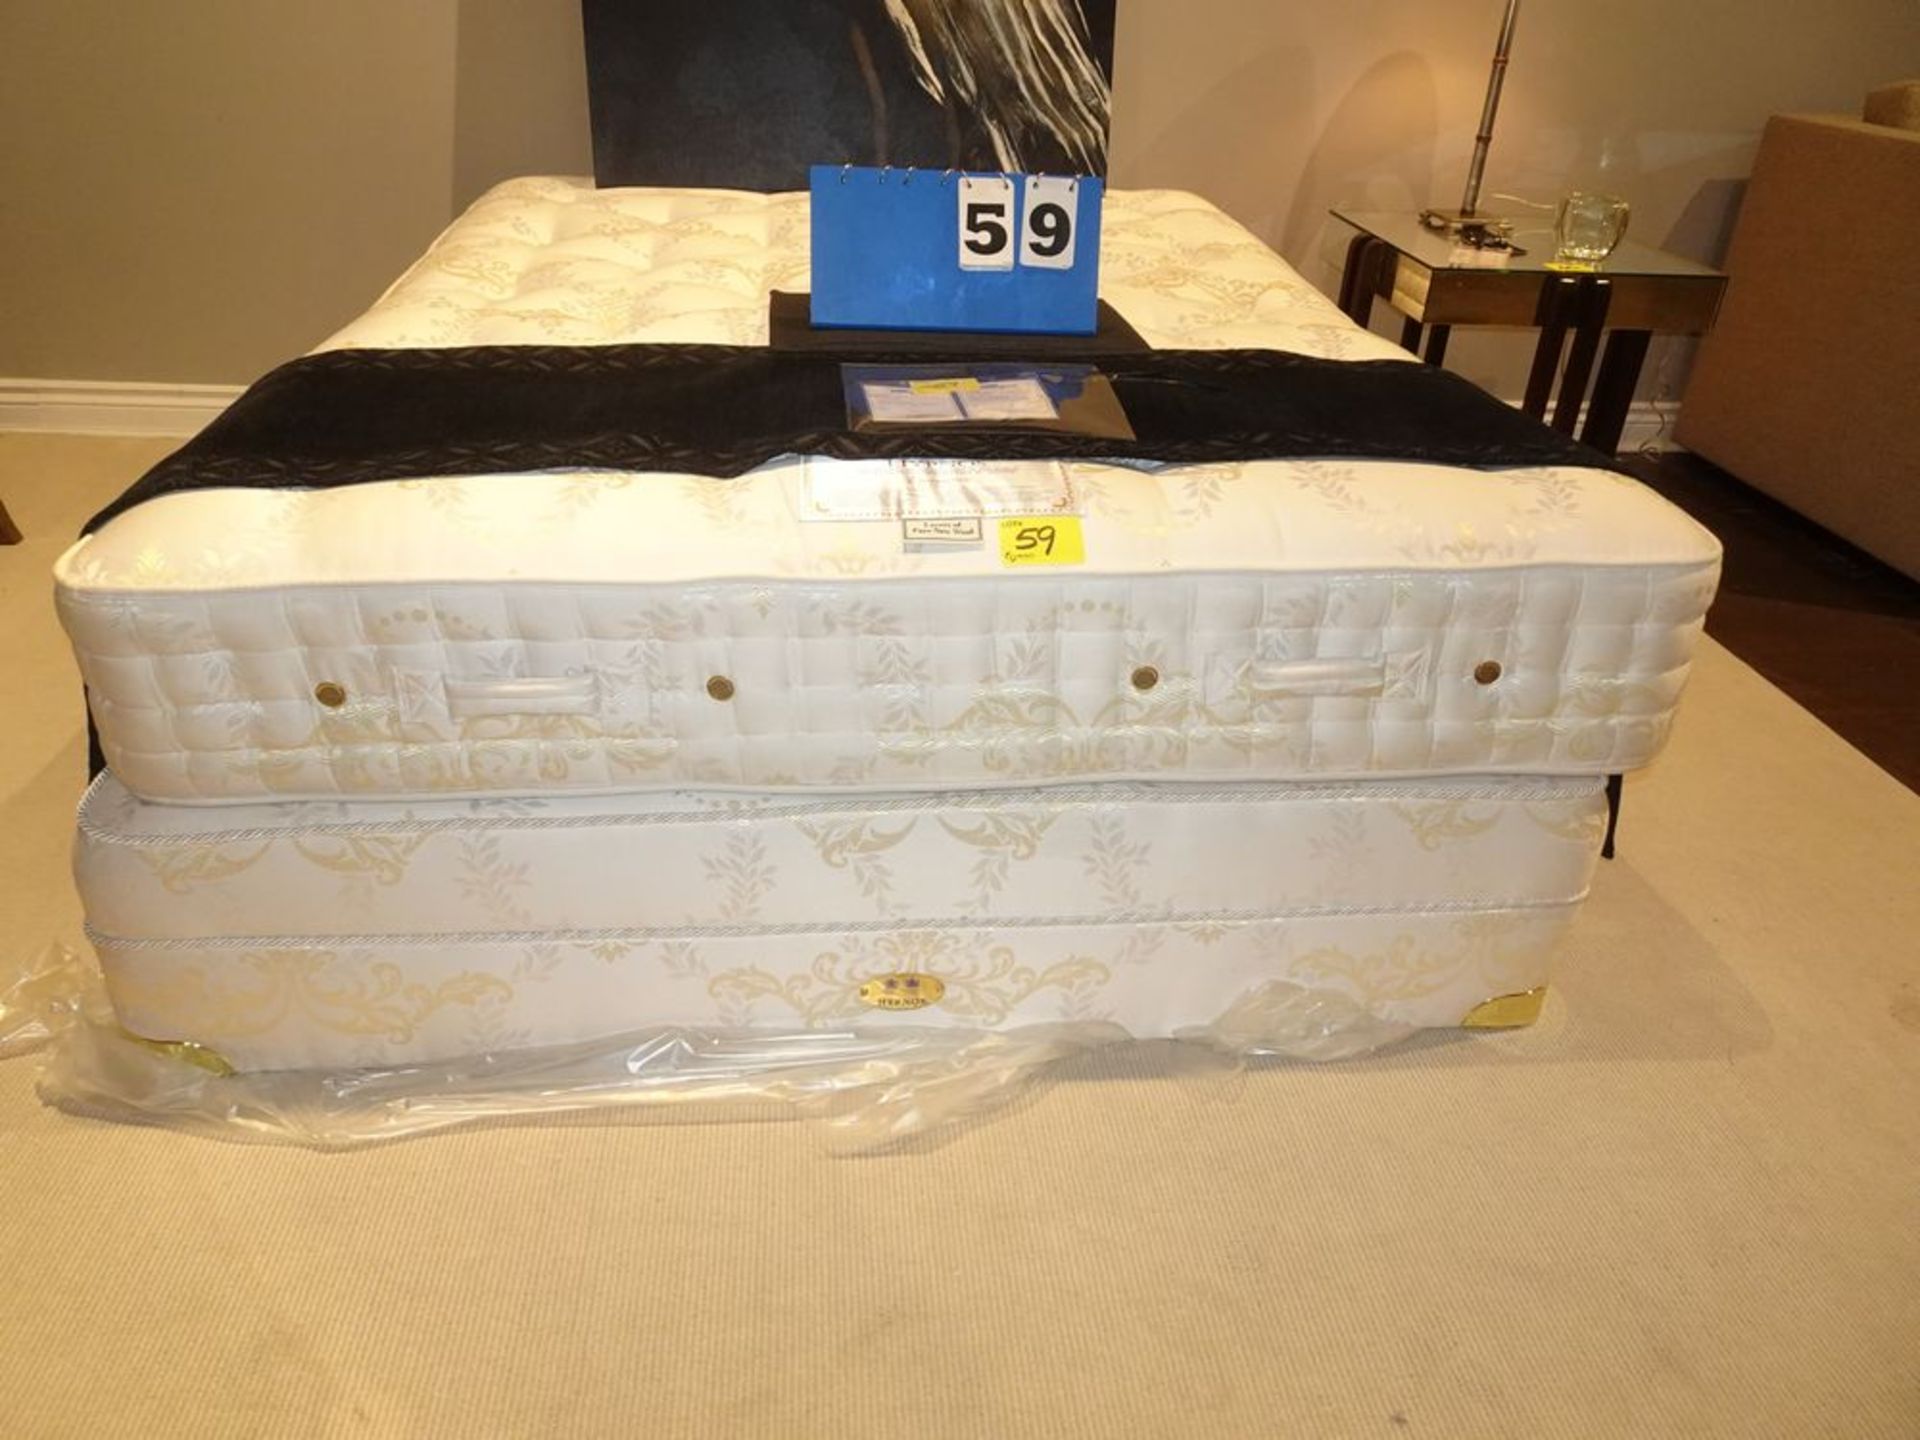 QUEEN SIZE - HYPNOS "EMINENCE" REGULAR COIL & LATEX MATTRESS W/ HYPNOS "EMINENCE" 11" POCKET COIL - Image 2 of 6